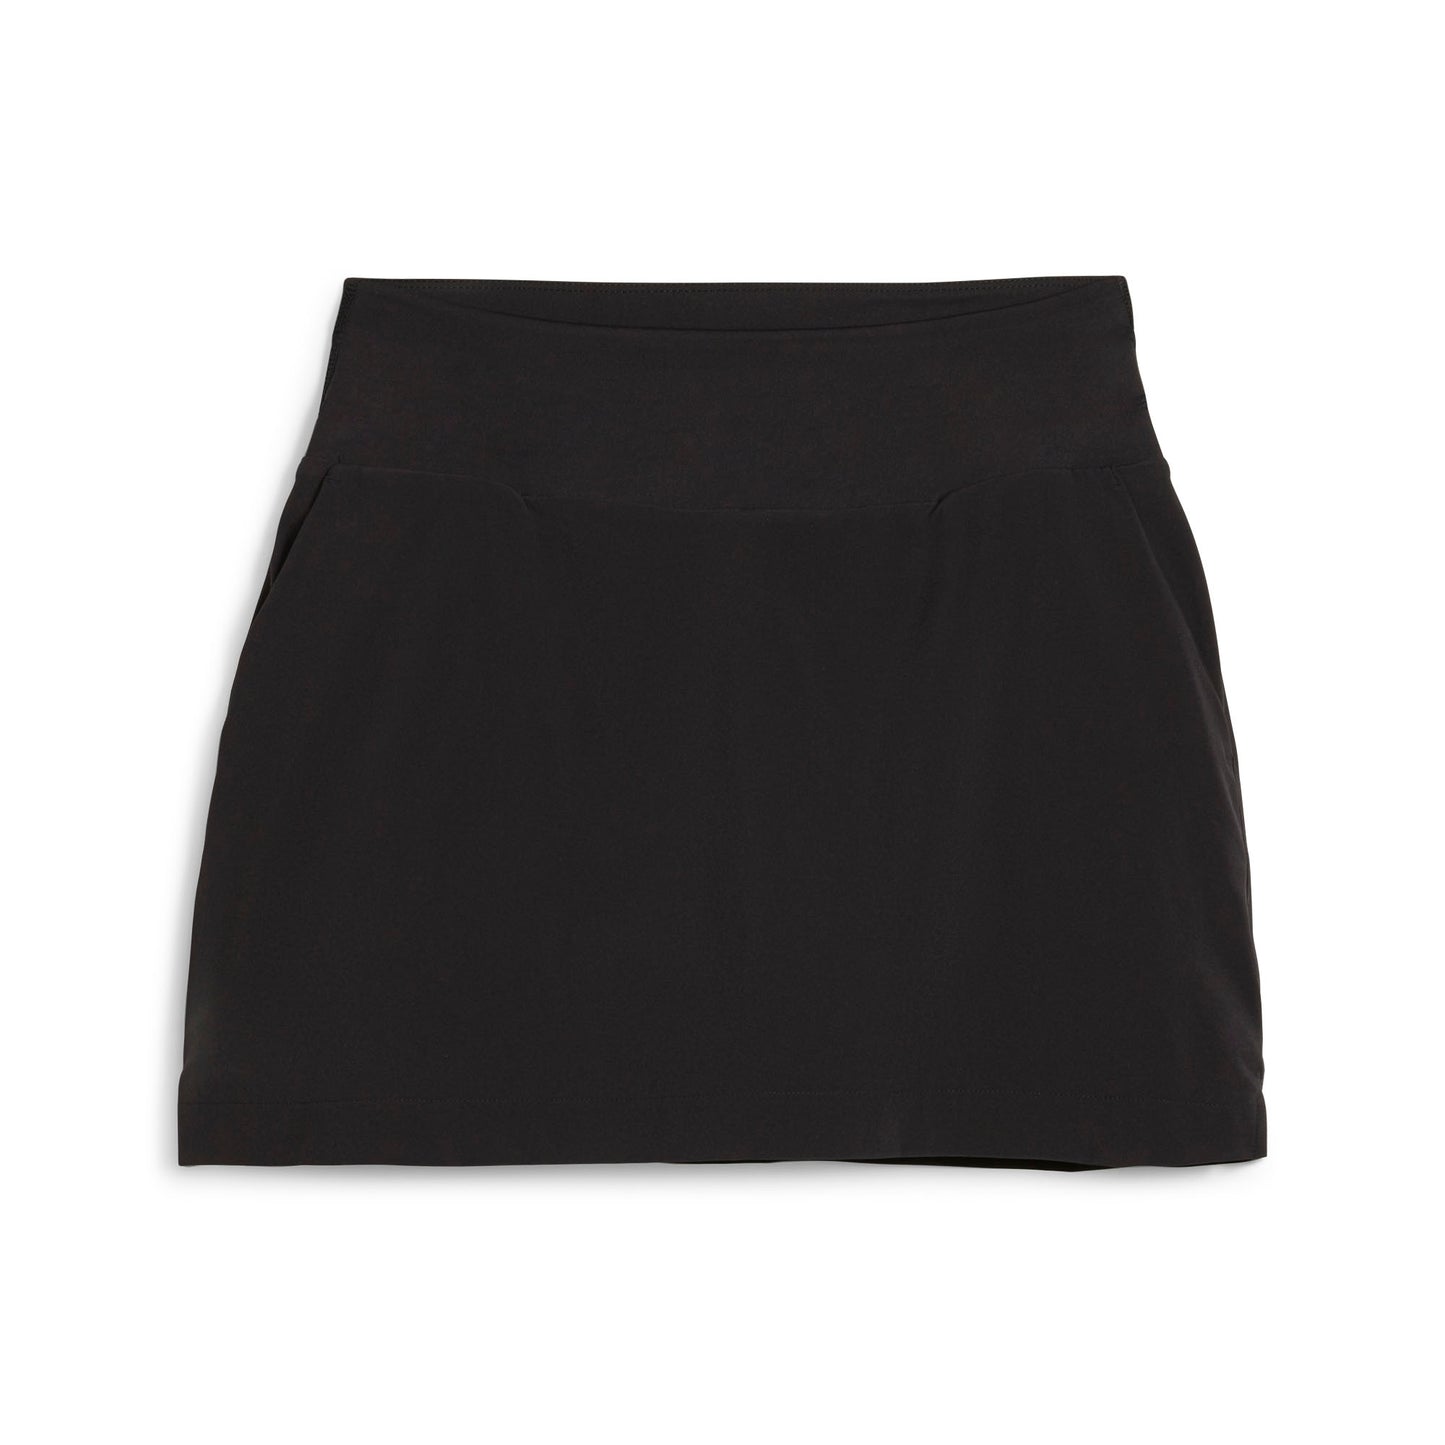 Puma Golf Ladies Skort in Black with High-Rise Waistband and UPF 40